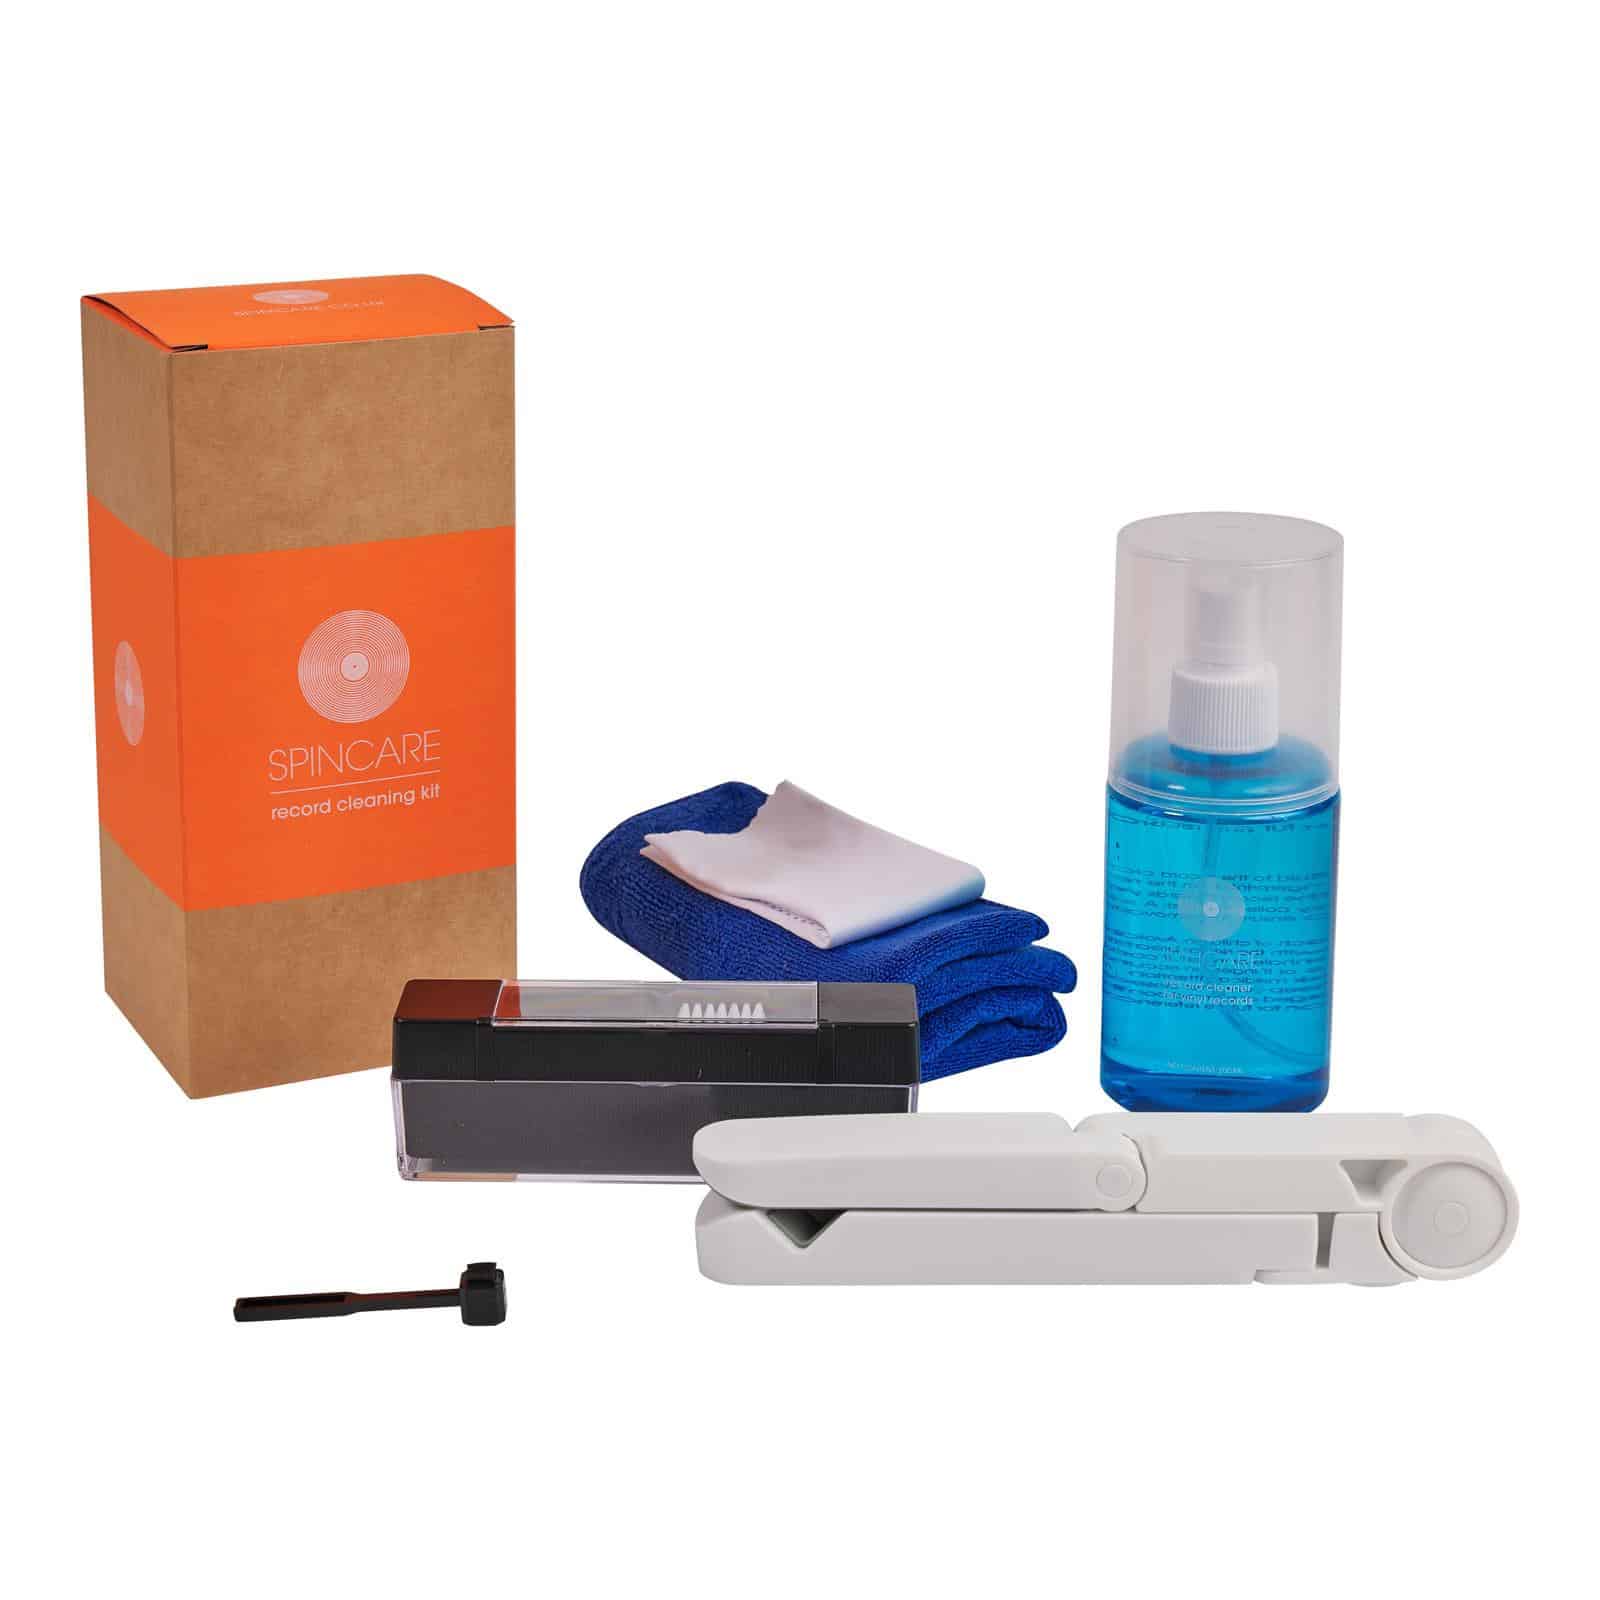 SPINCARE Vinyl Record LP Cleaning Kit